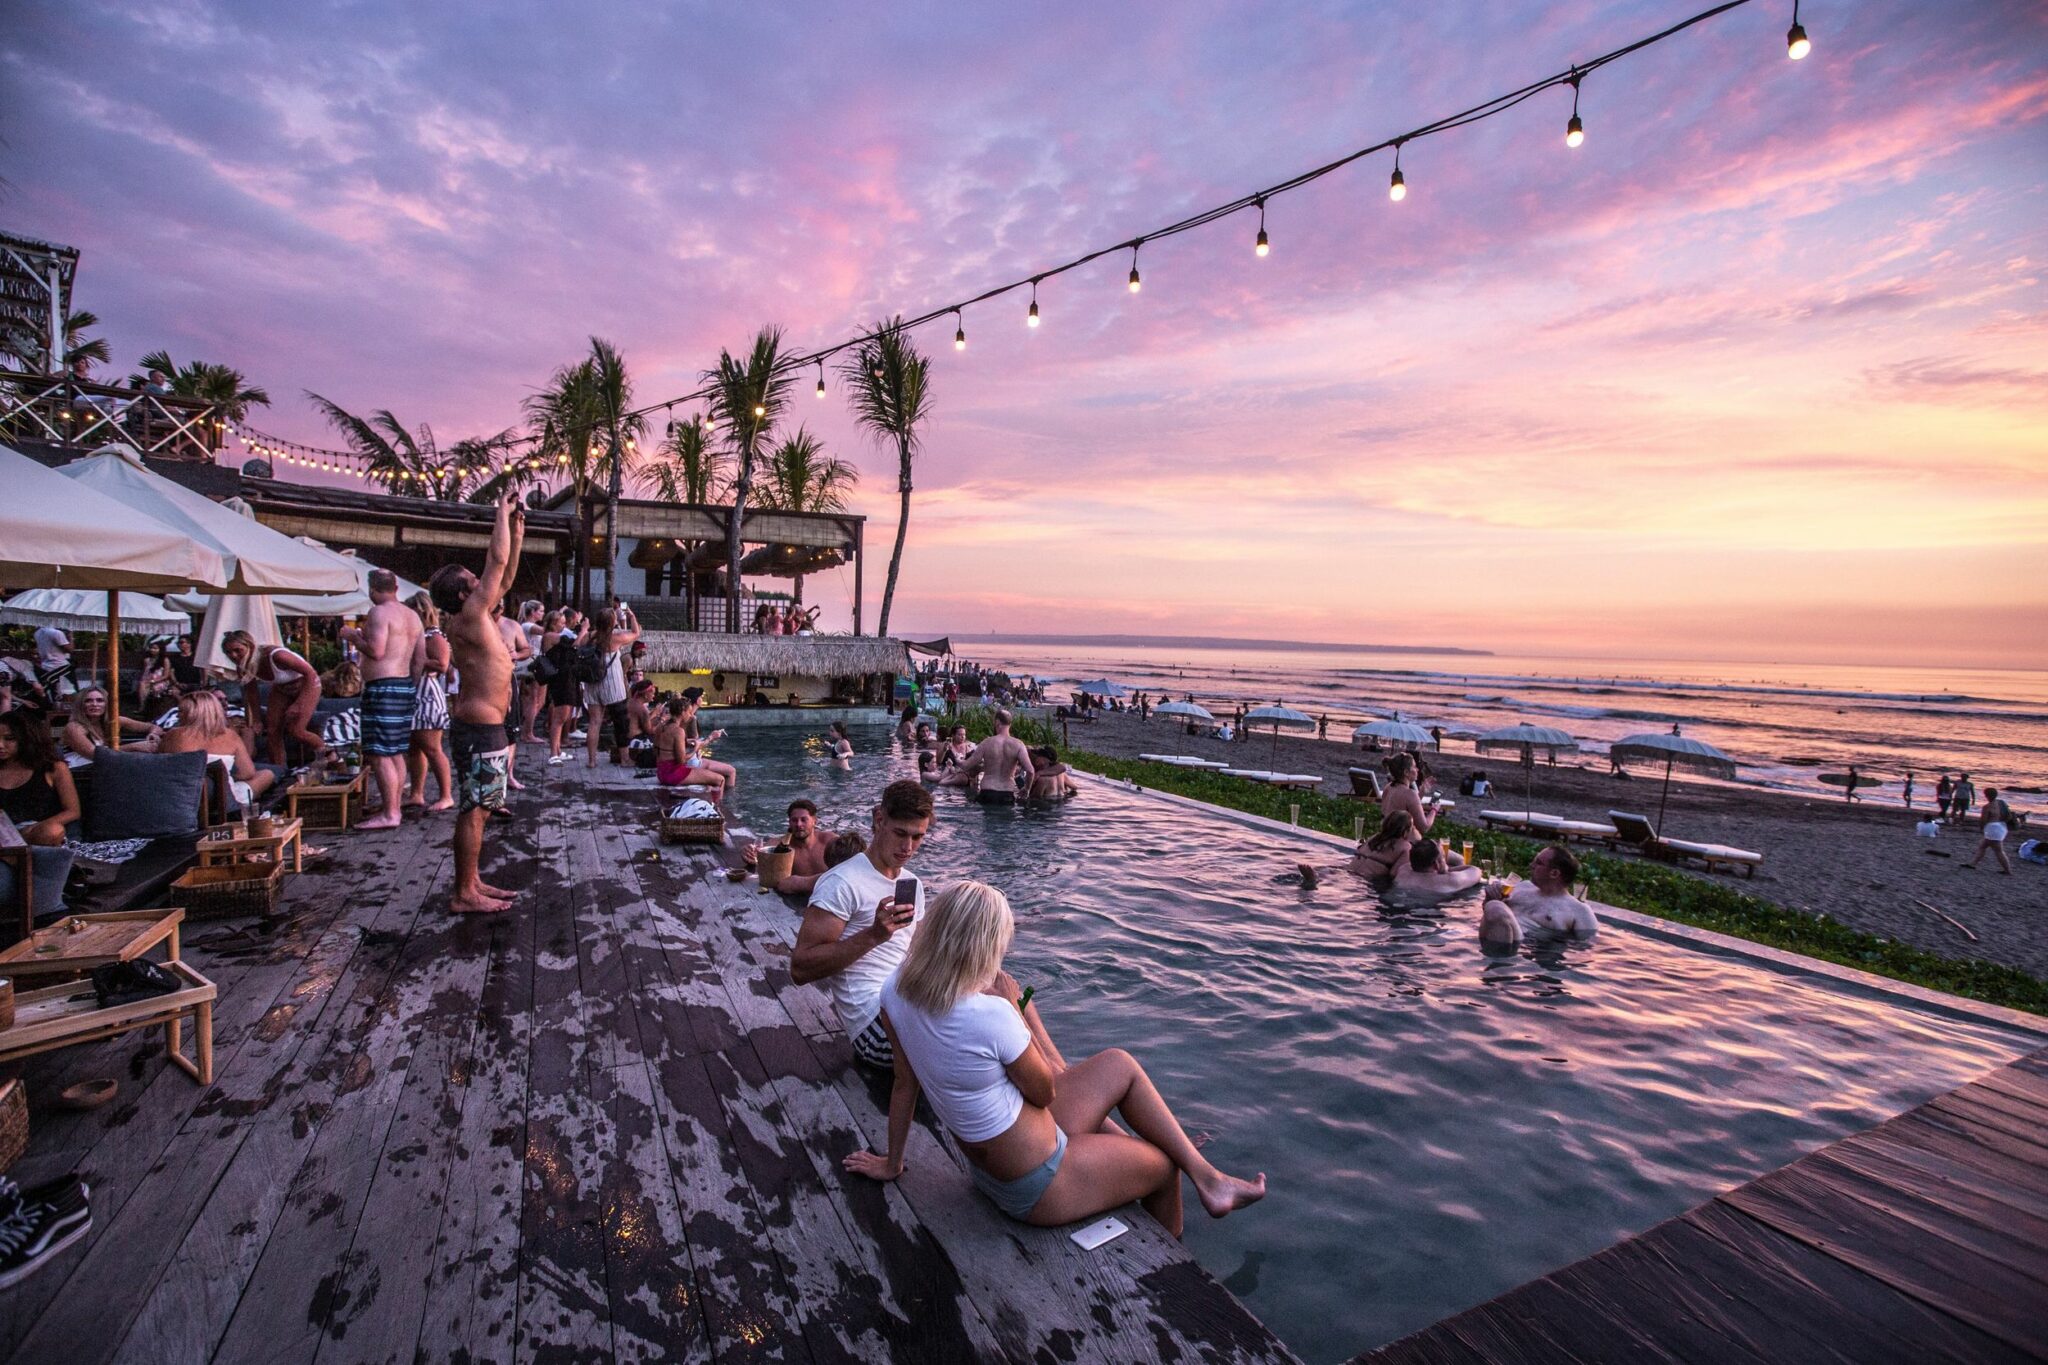 A Guide to the Best Restaurants and Cafes in Canggu, Bali